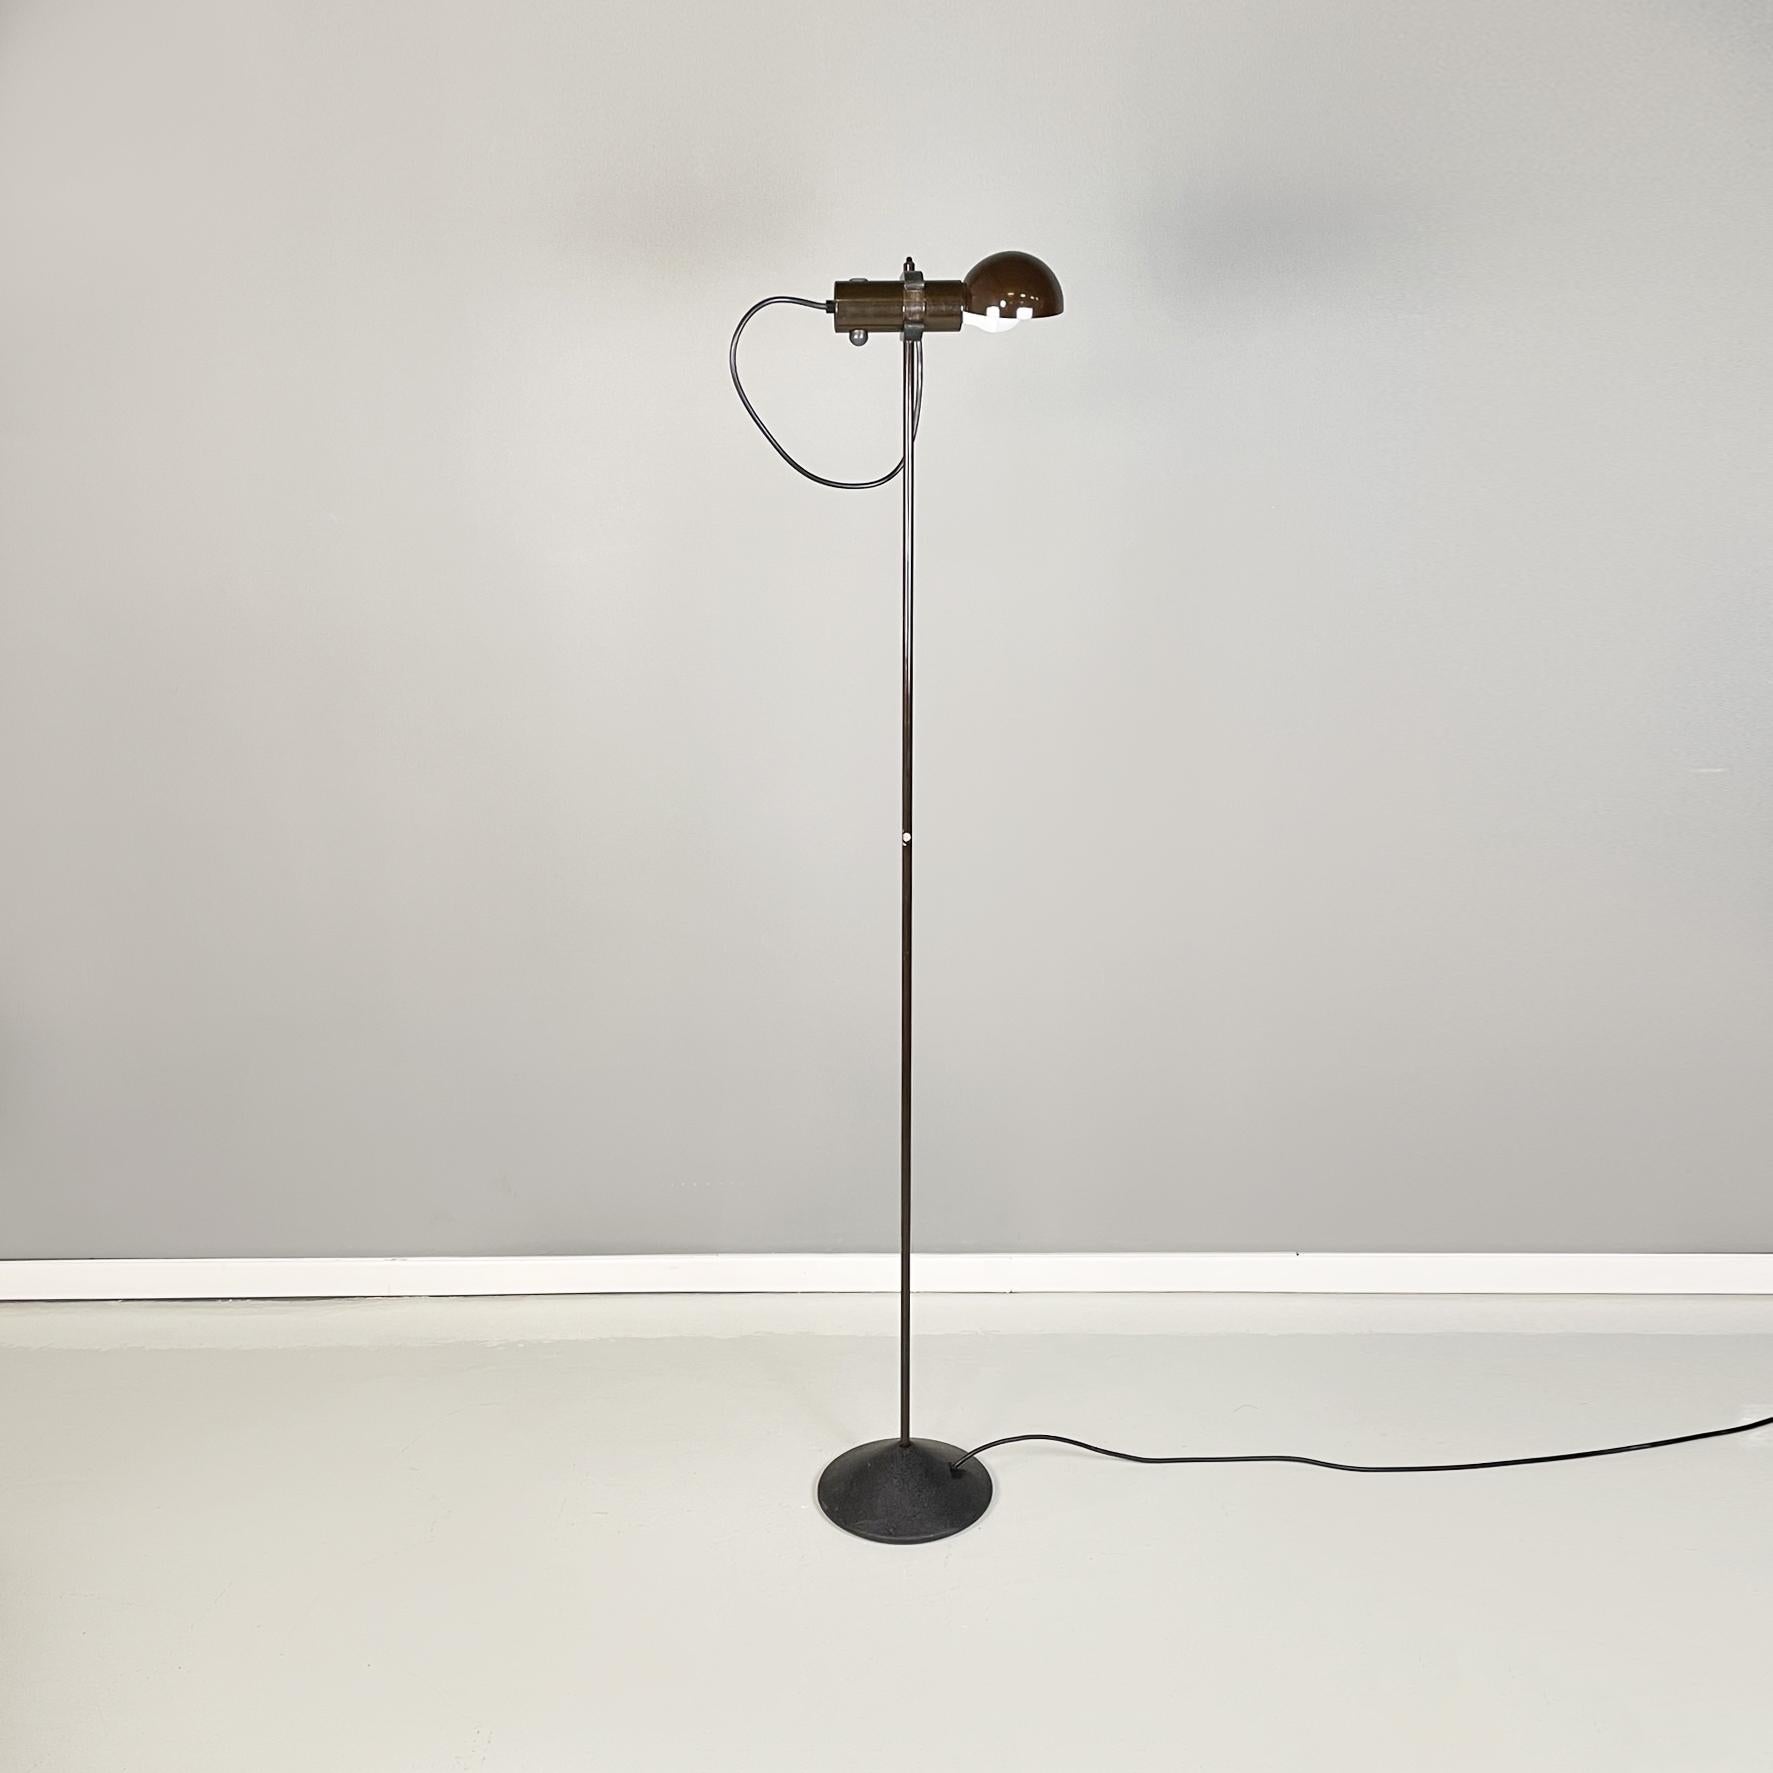 Italian modern Adjustable floor lamp in brown metal by Tronconi, 1970s
Floor lamp with adjustable height and inclination diffuser in brown painted metal. The diffuser is composed of a hemisphere and a cylinder, which connects to the central